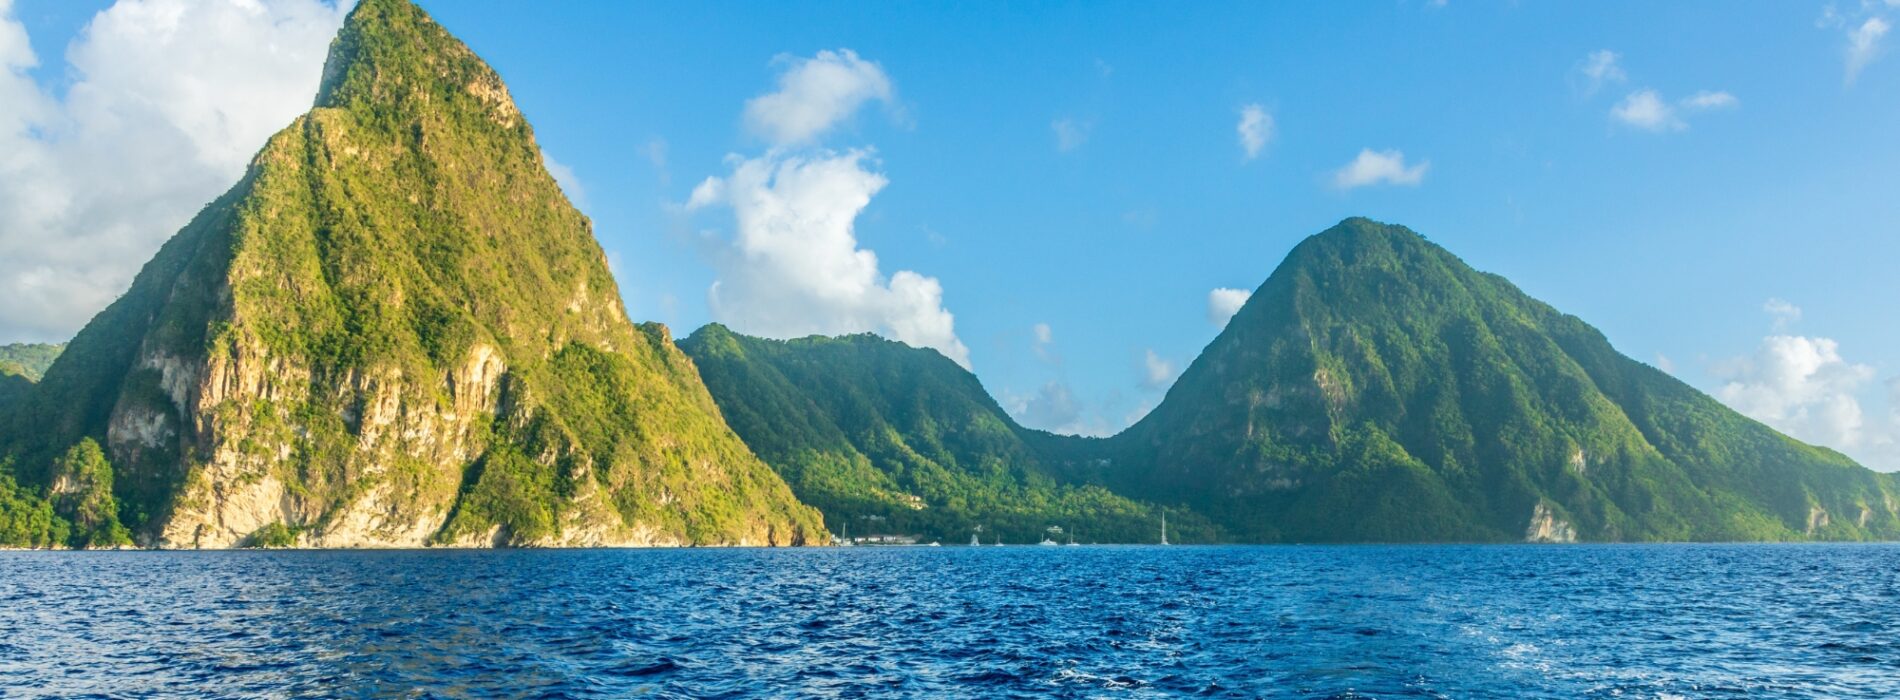 St Lucia .